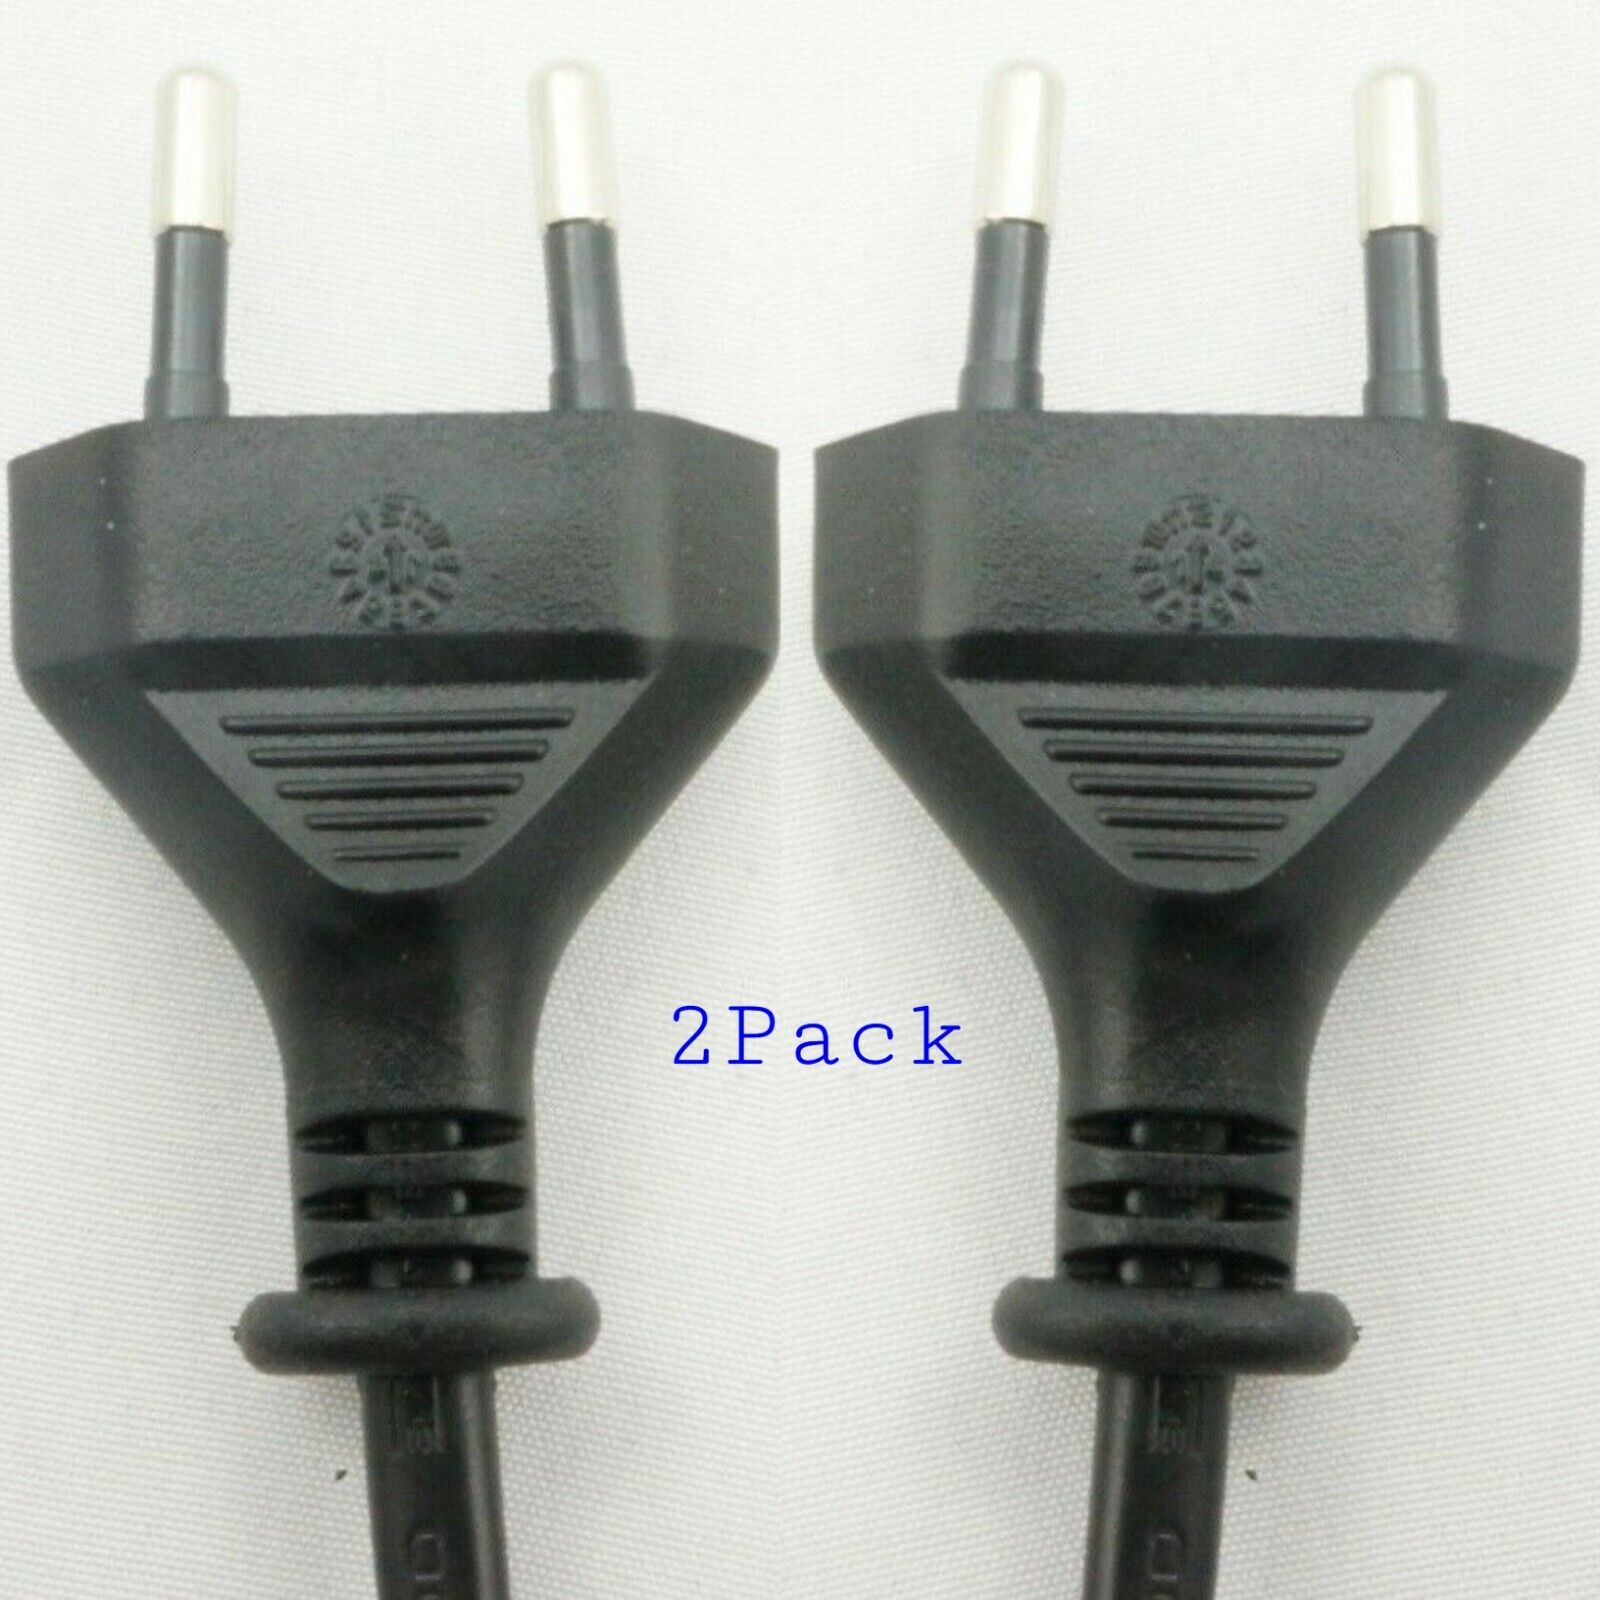 Longwell (2Pack) - Professional Europe LW-EU3 VDE 250V 2.5A 2 core cable